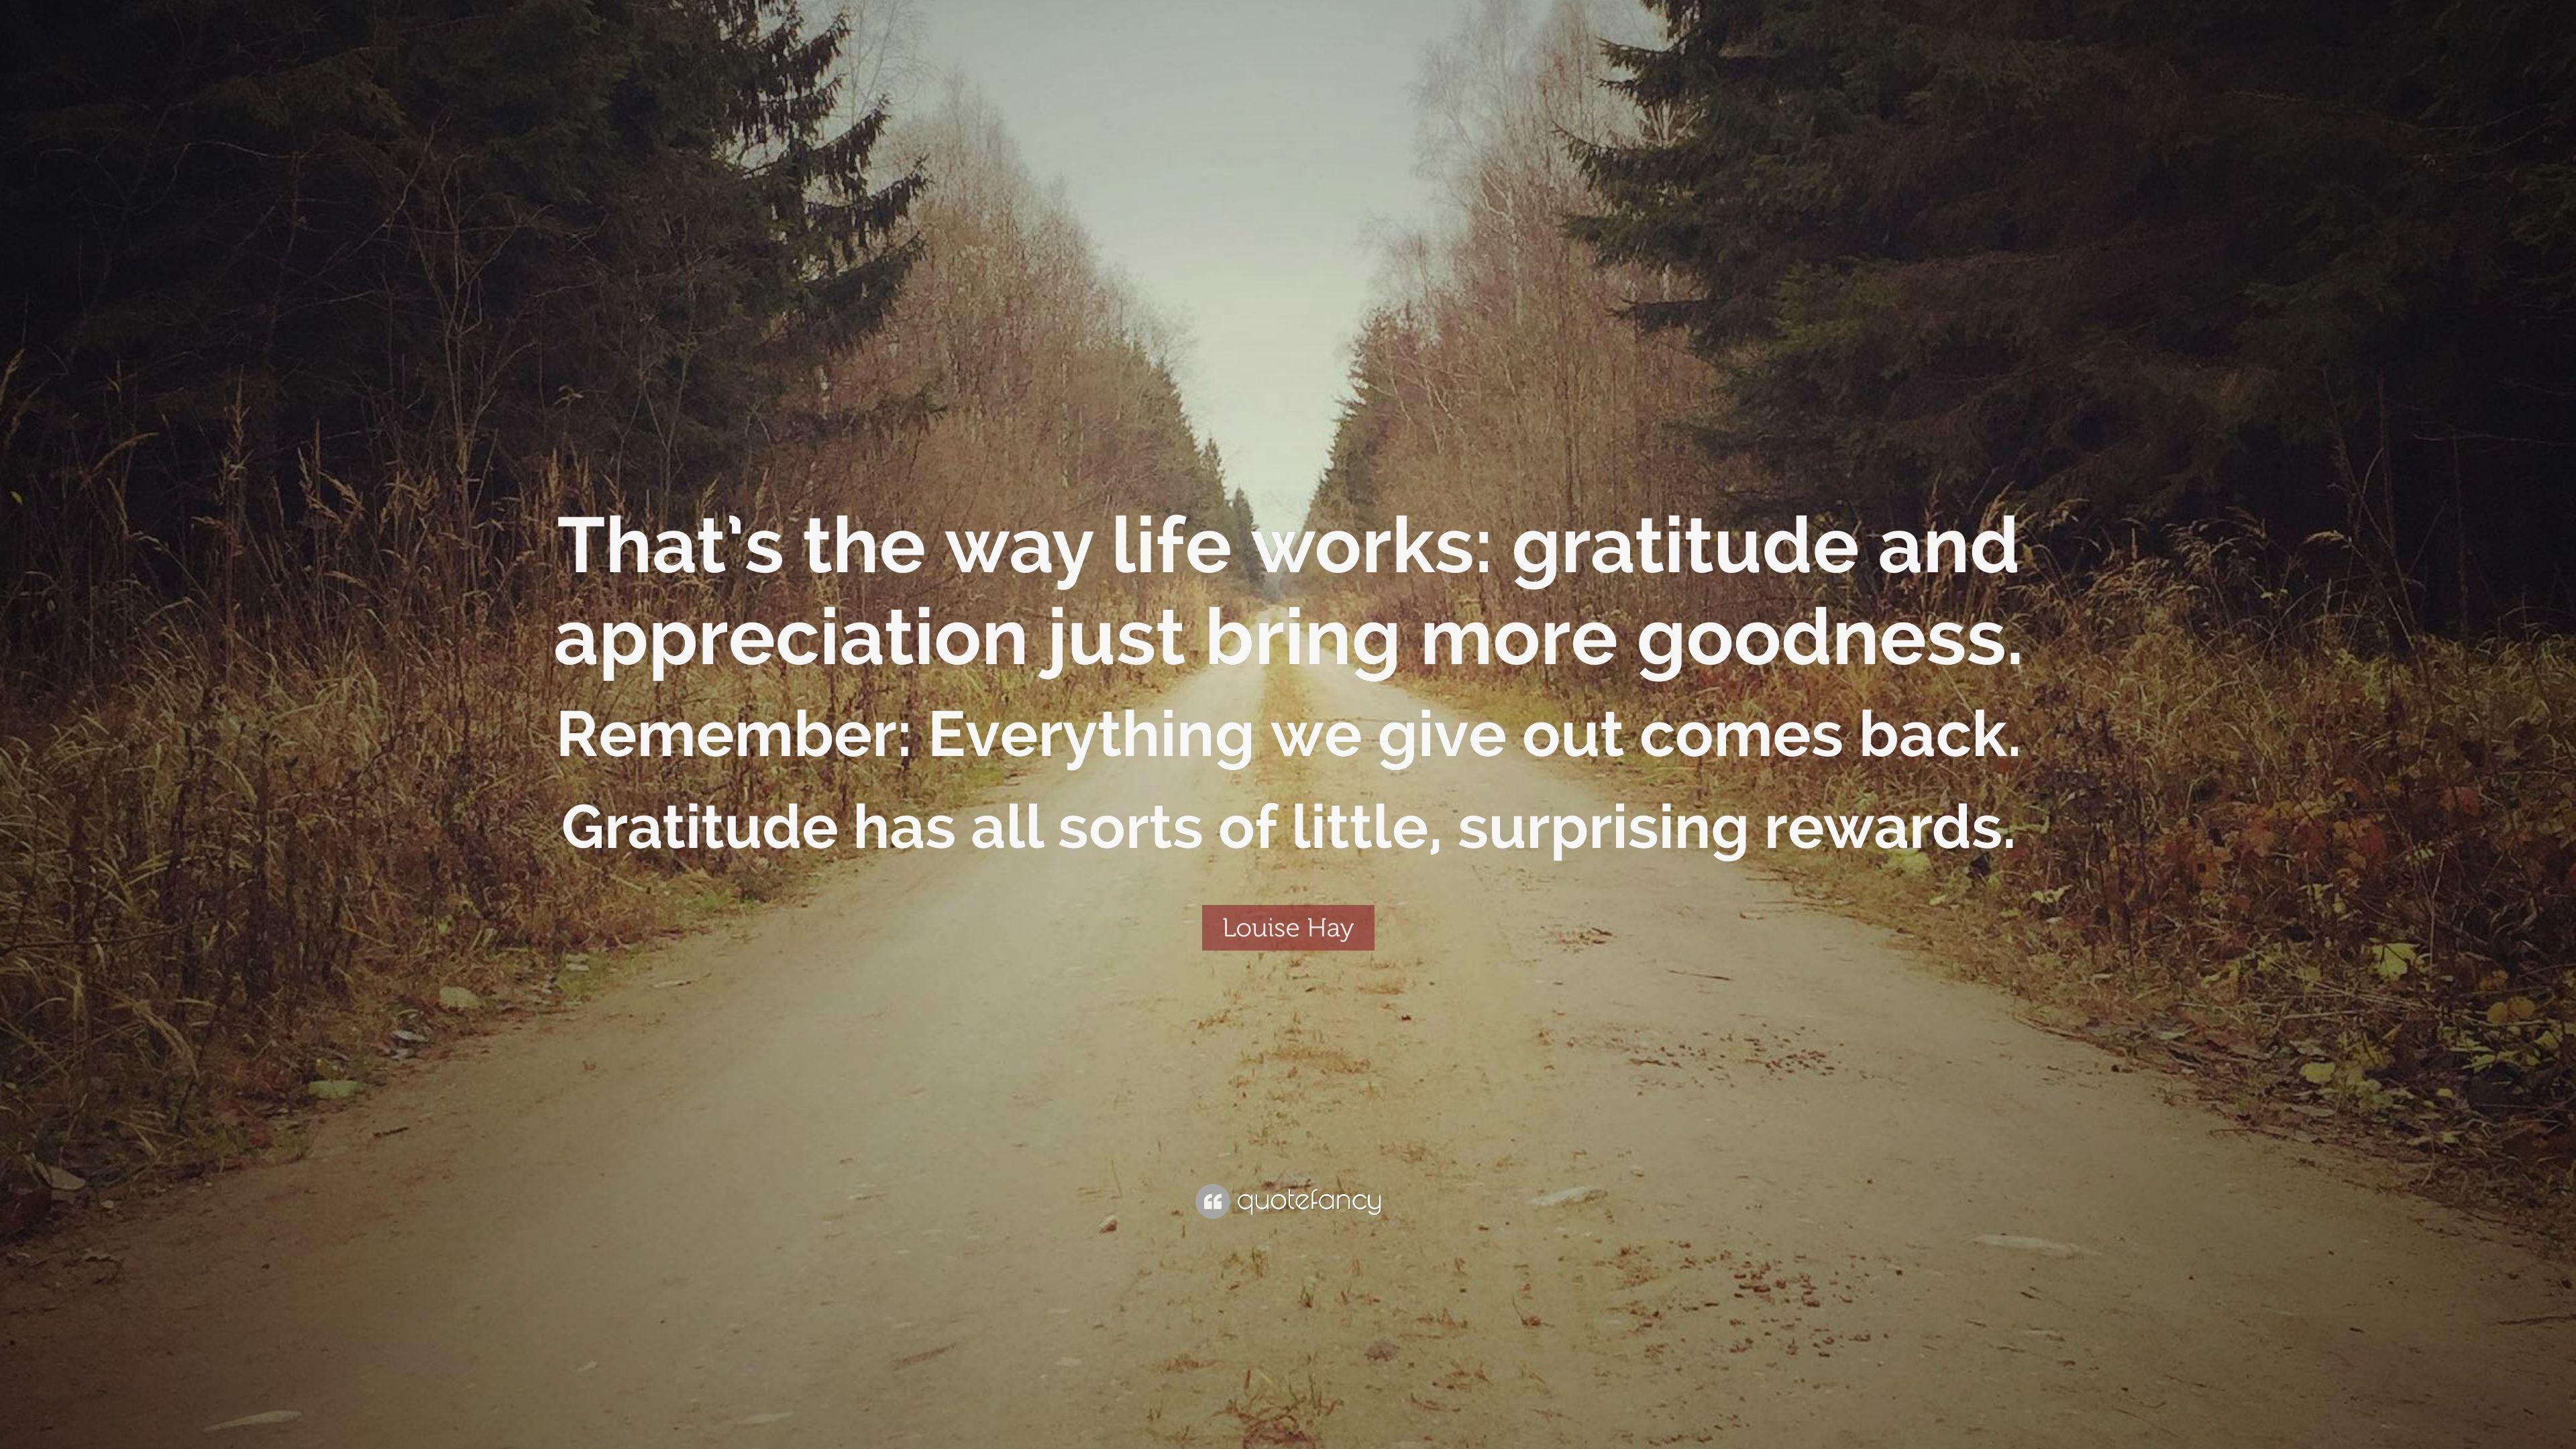 Louise Hay Quote: “That's the way life works: gratitude